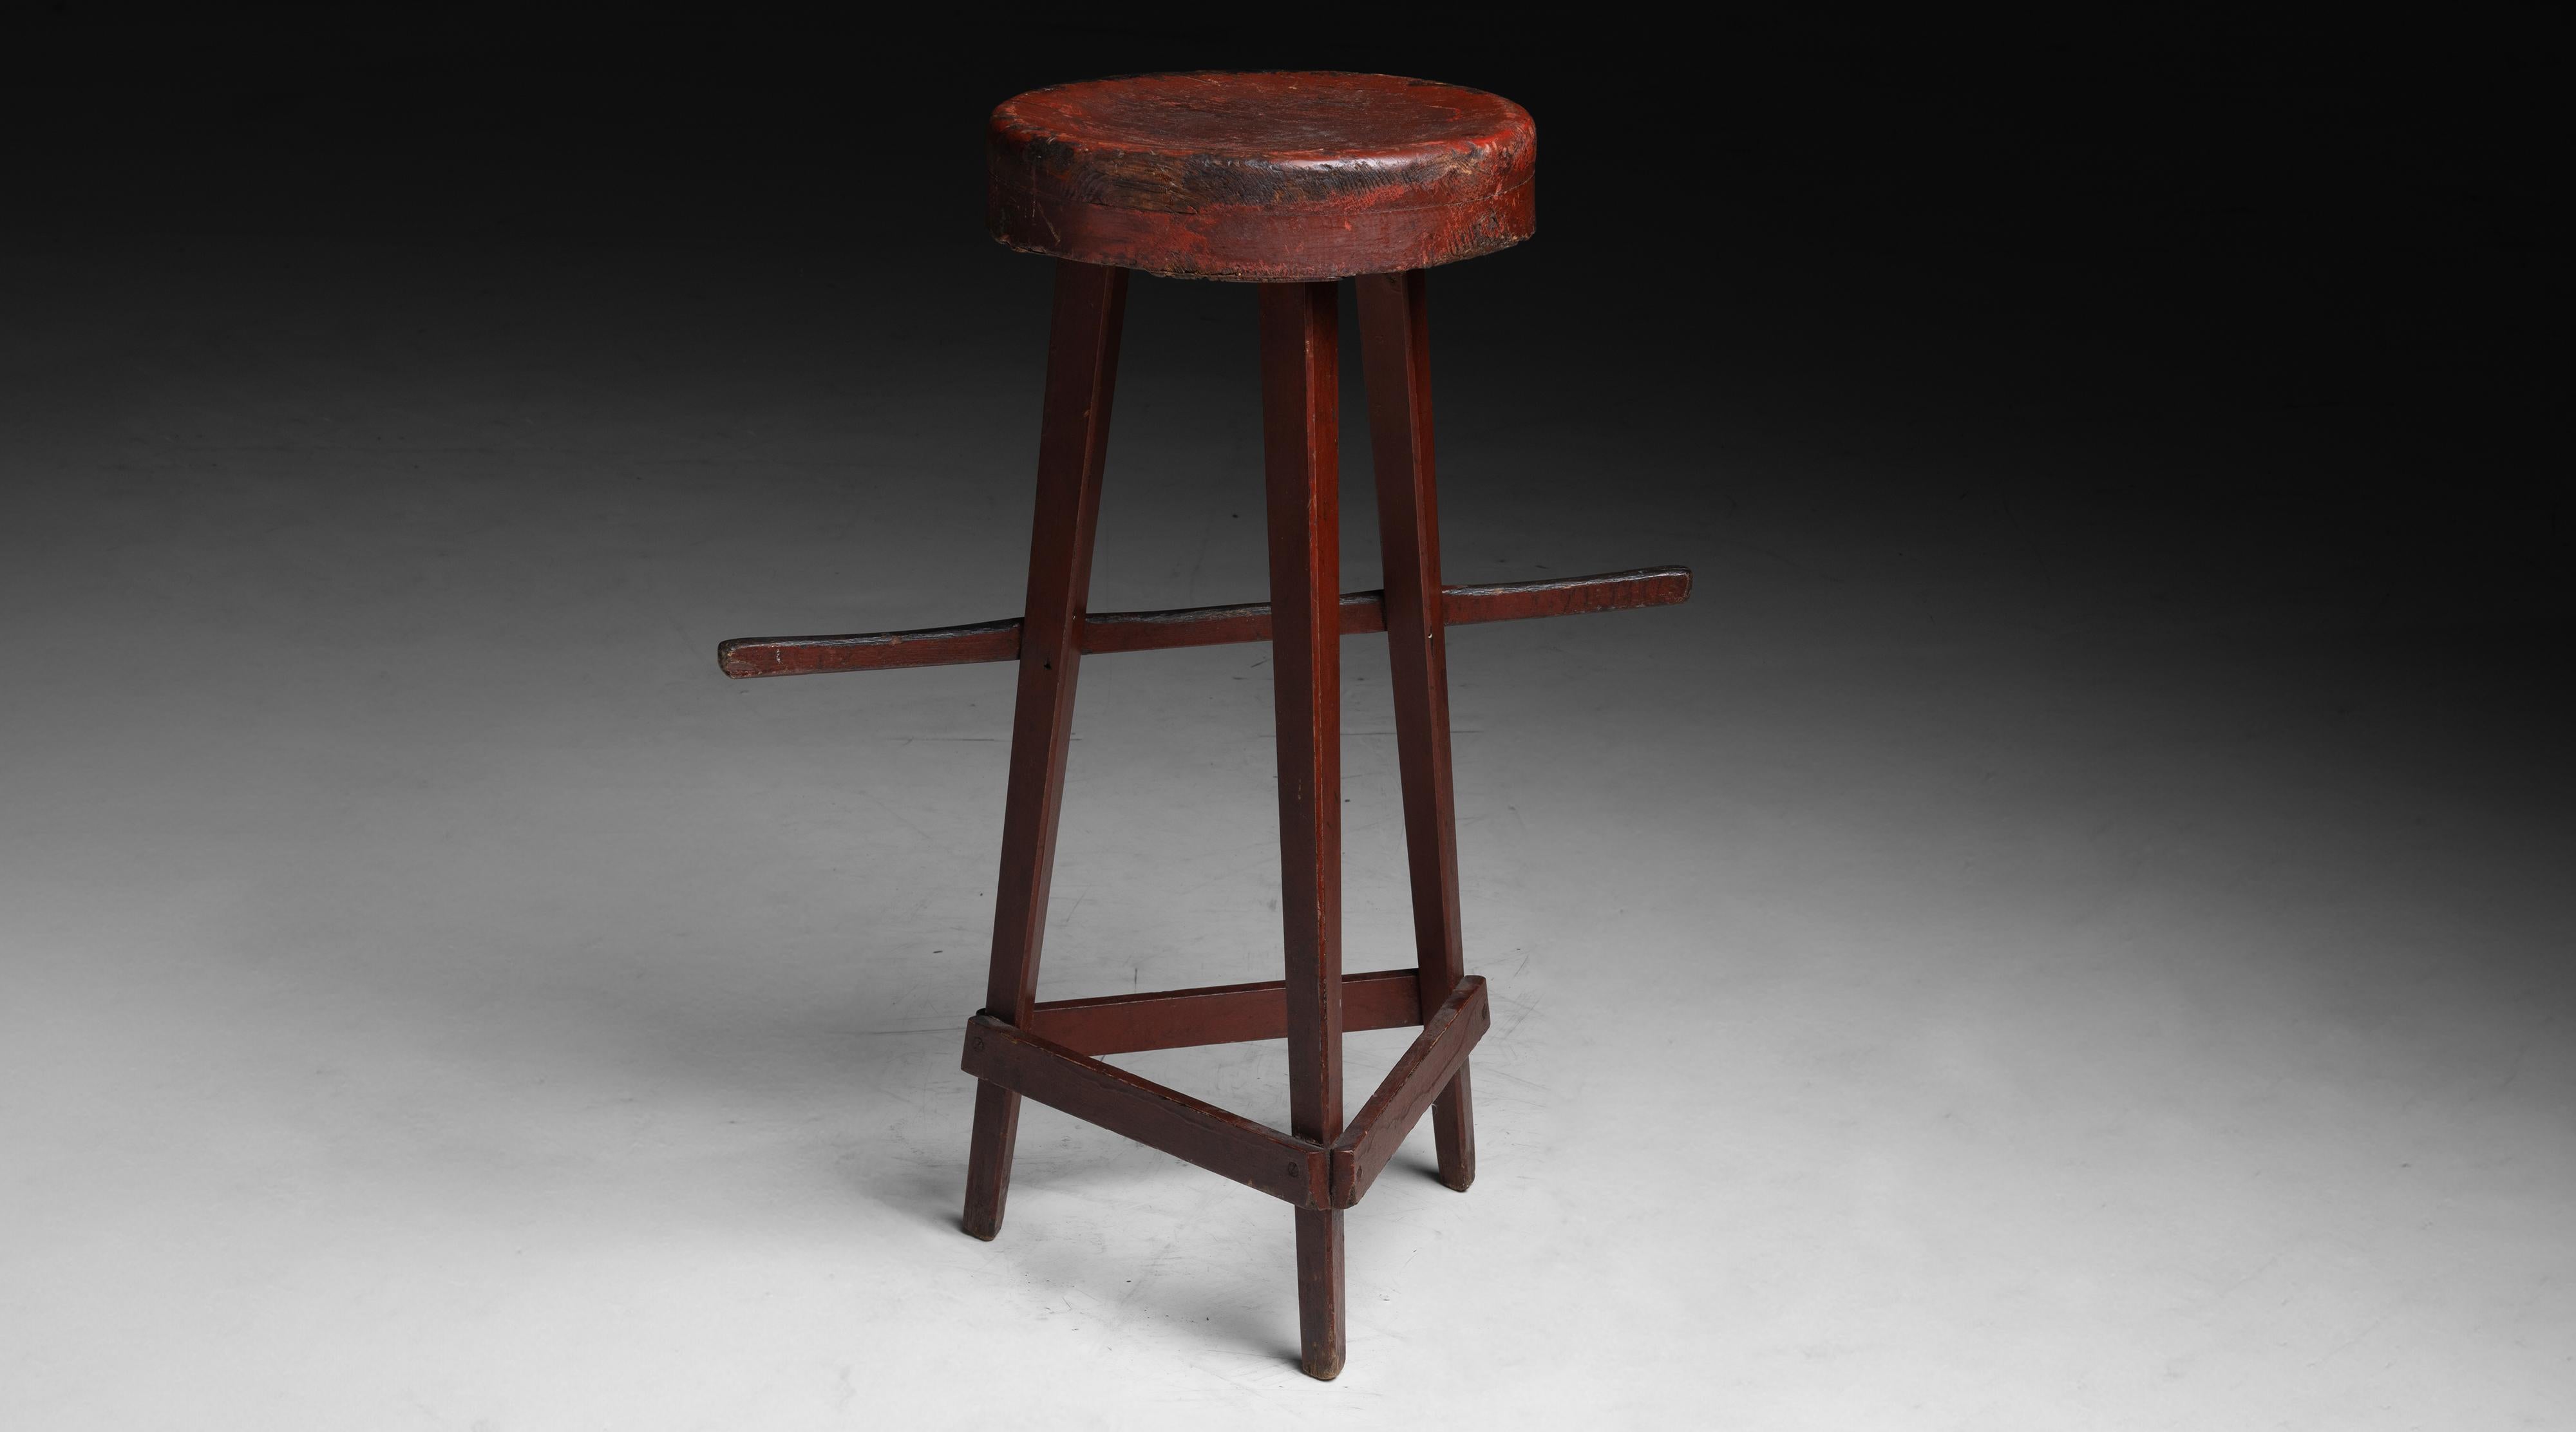 Painted Stool
England circa 1900
In original painted finish, from a jeweler's shop.
23.25”w x 13”d x 27.5”h